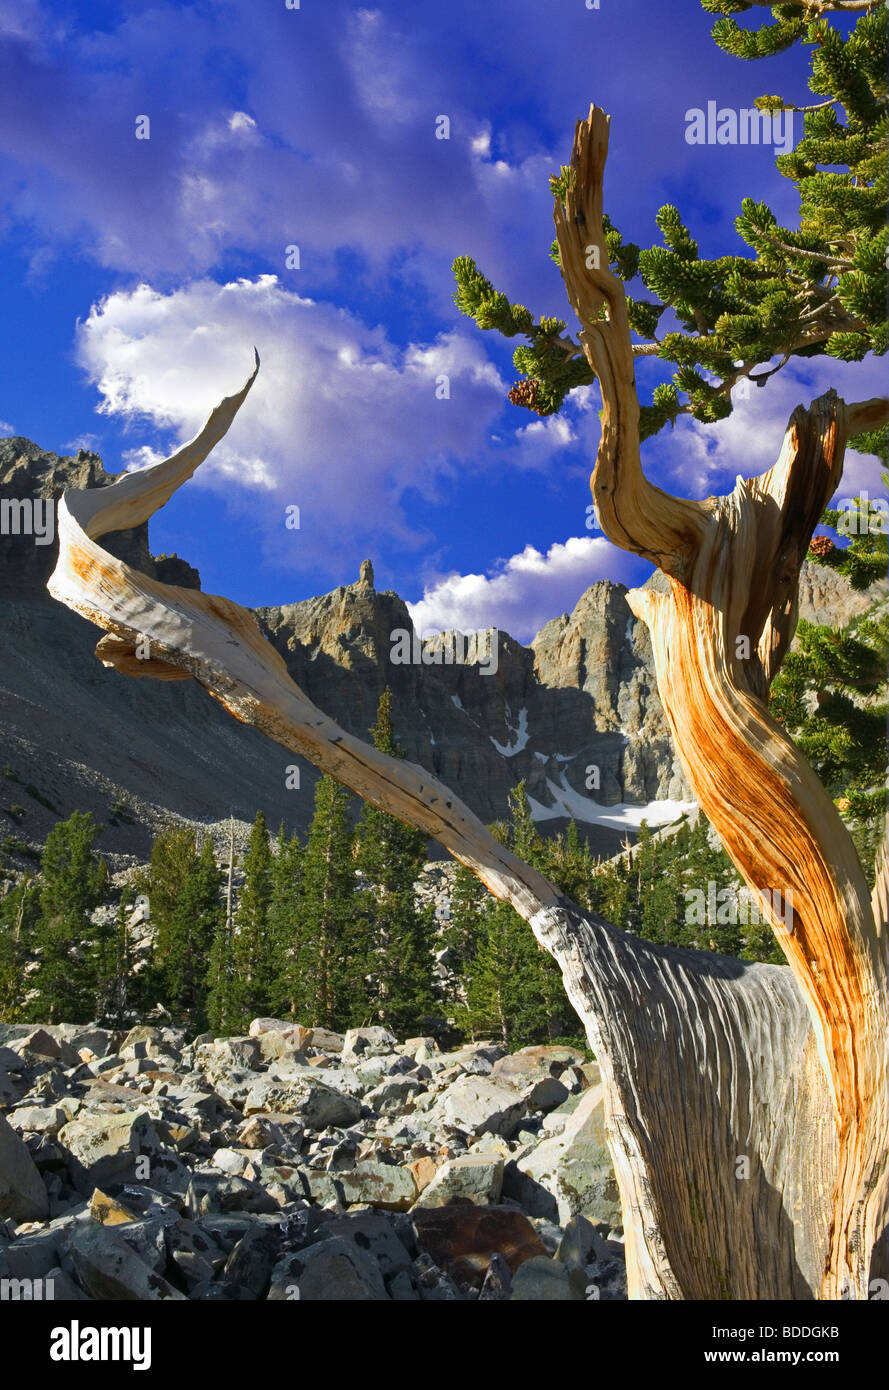 Close up of Bristlecone Pine and Wheeler Peak. Great Basin National Park, Nevada (This images has had a sky added) Stock Photo